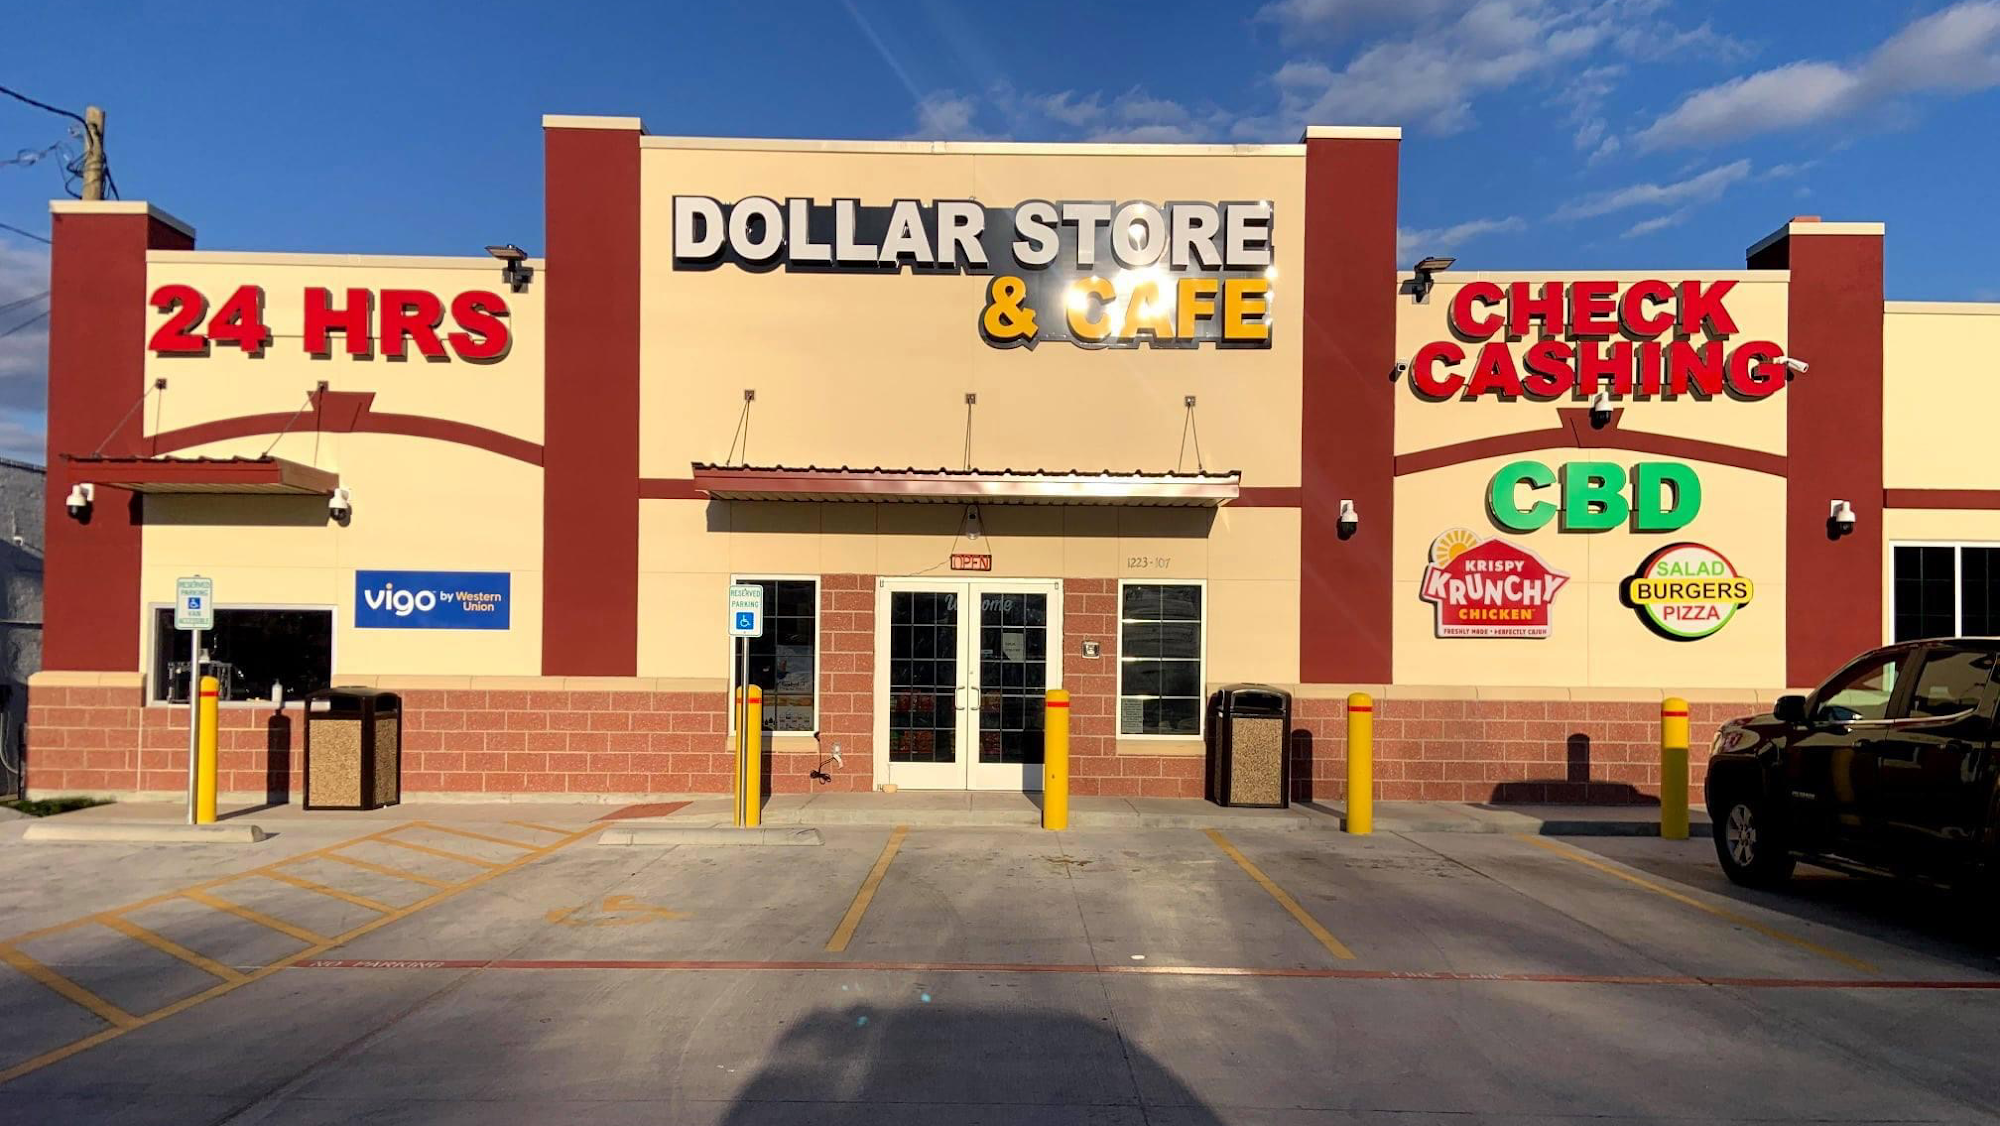 Dollar Store & Cafe